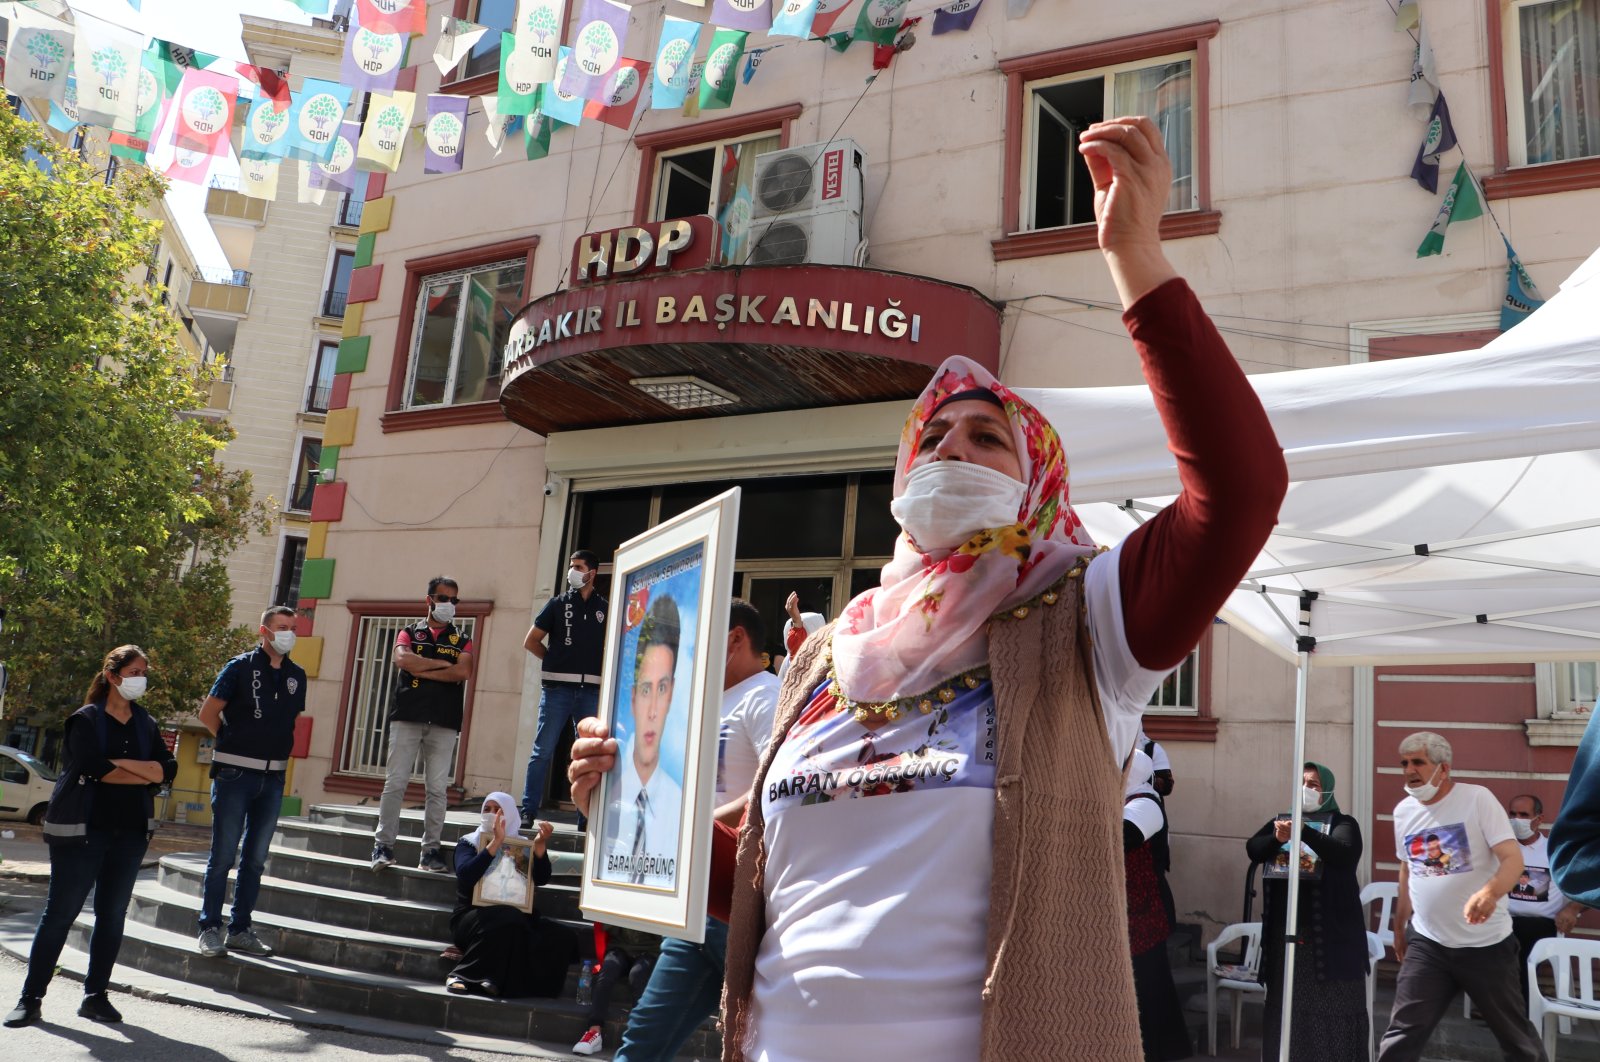 One of the mothers whose son was abducted and forcibly recruited by the PKK protests in front of the HDP headquarters in Diyarbakır, southeastern Turkey, Sept. 3, 2020. (AA Photo)